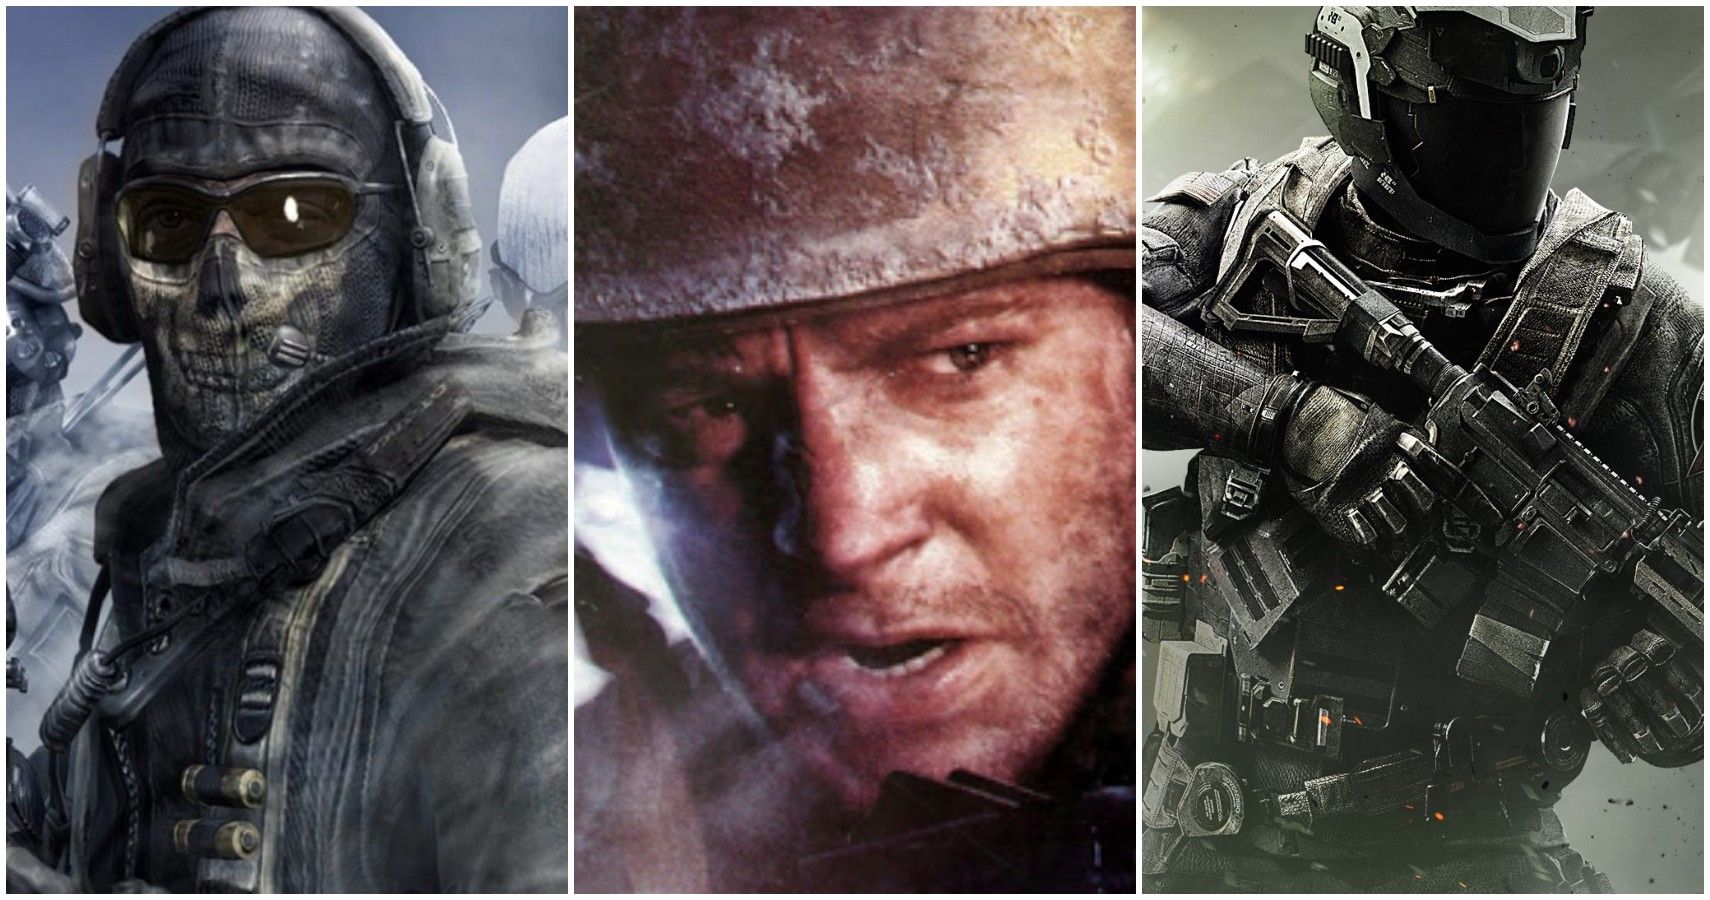 10 Worst Call Of Duty Games, According To Metacritic